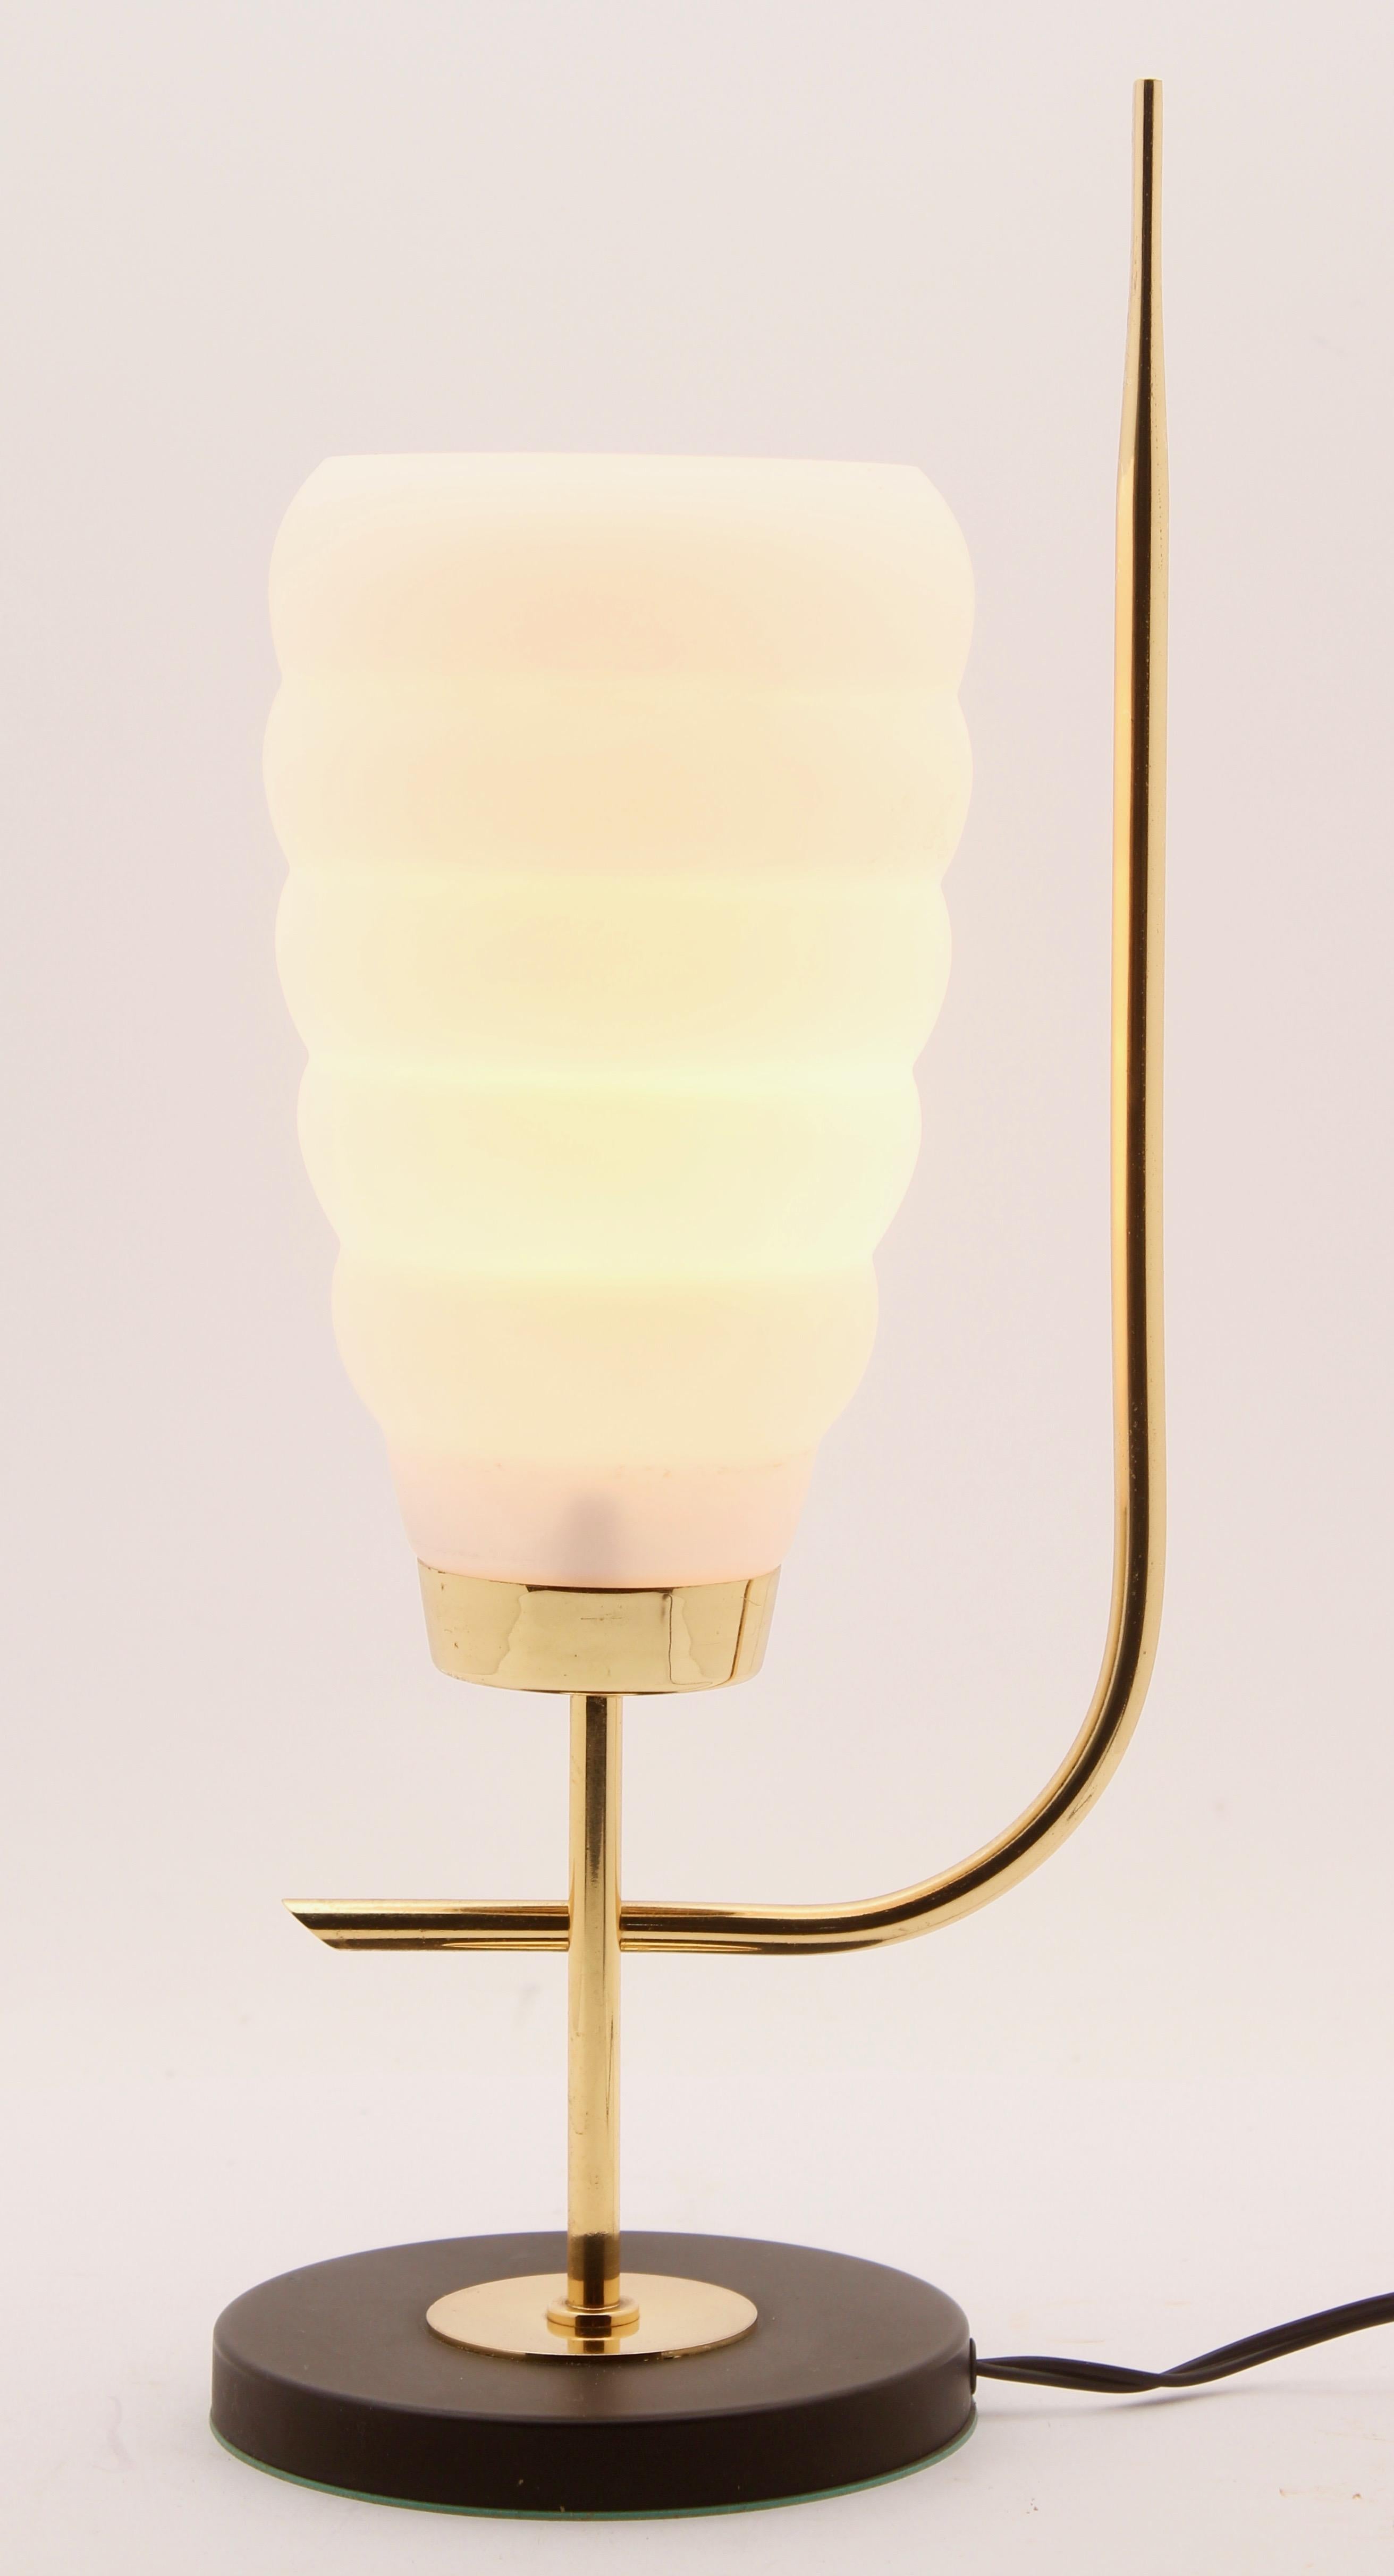 1970s table lamp in the Scandinavian style with brass fittings on a metal base. The lamp has a shade made of acid-etched milk-glass giving it a matte, white surface, and provides a strong up-light with a softer, diffused light at eye level.
Ideal